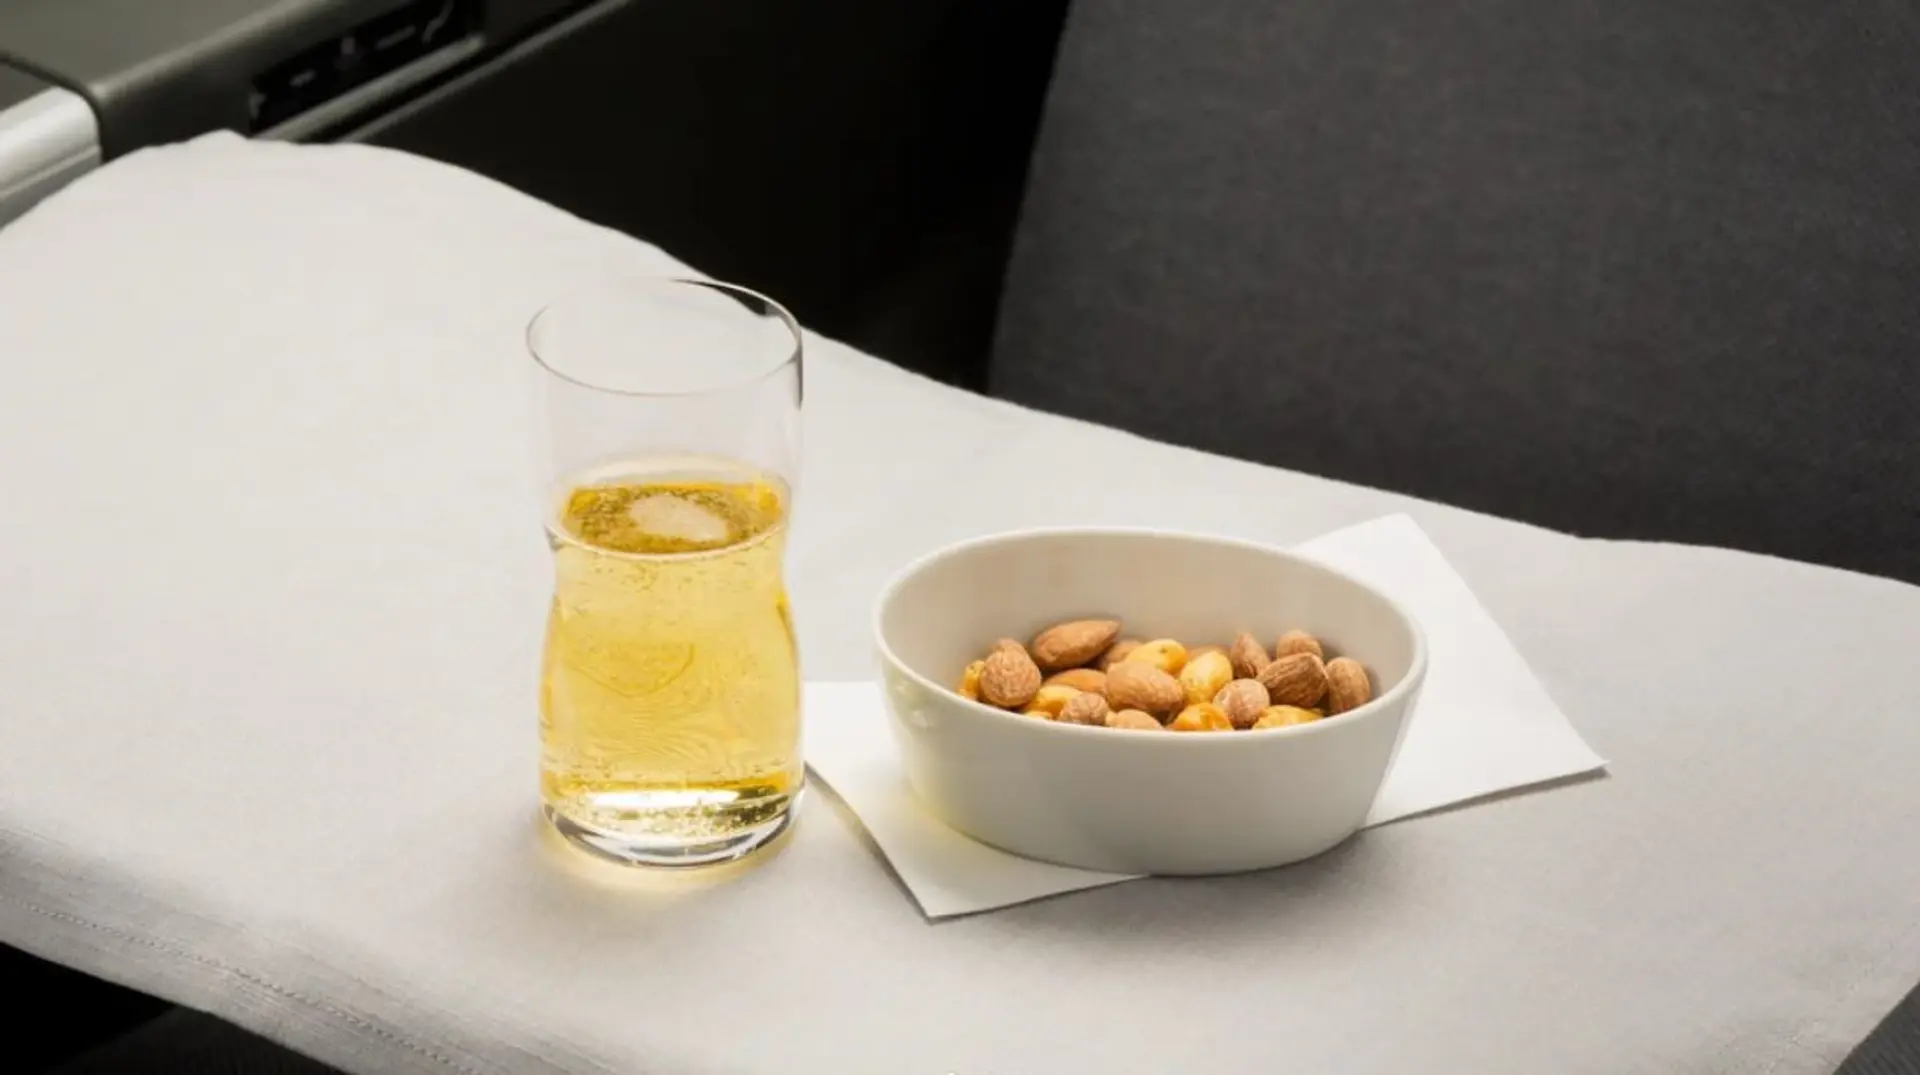 Airlines News - SAS upgrades Champagne offering to “Special Club”